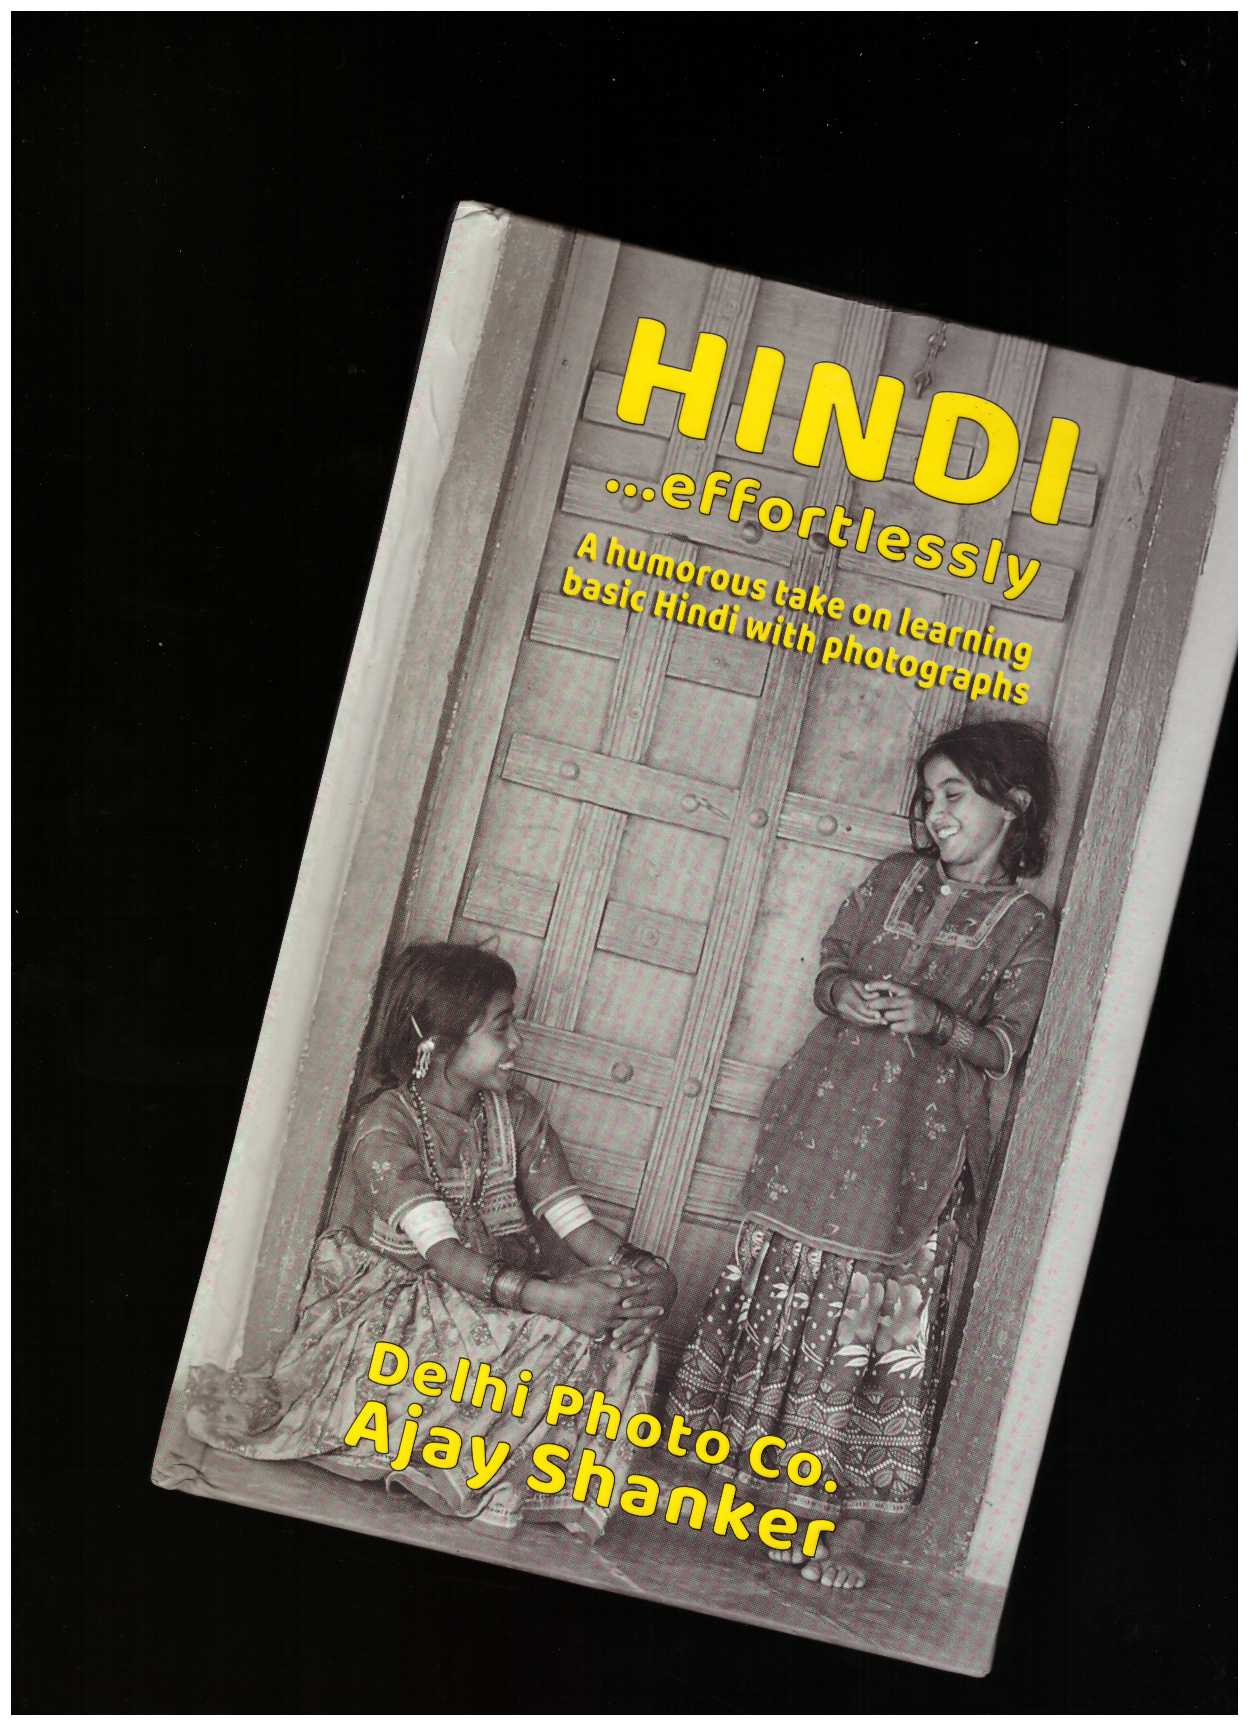 SHANKER, Ajay - Hindi Effortlessly... A Homorous take on learning basic Hindi with Photographs